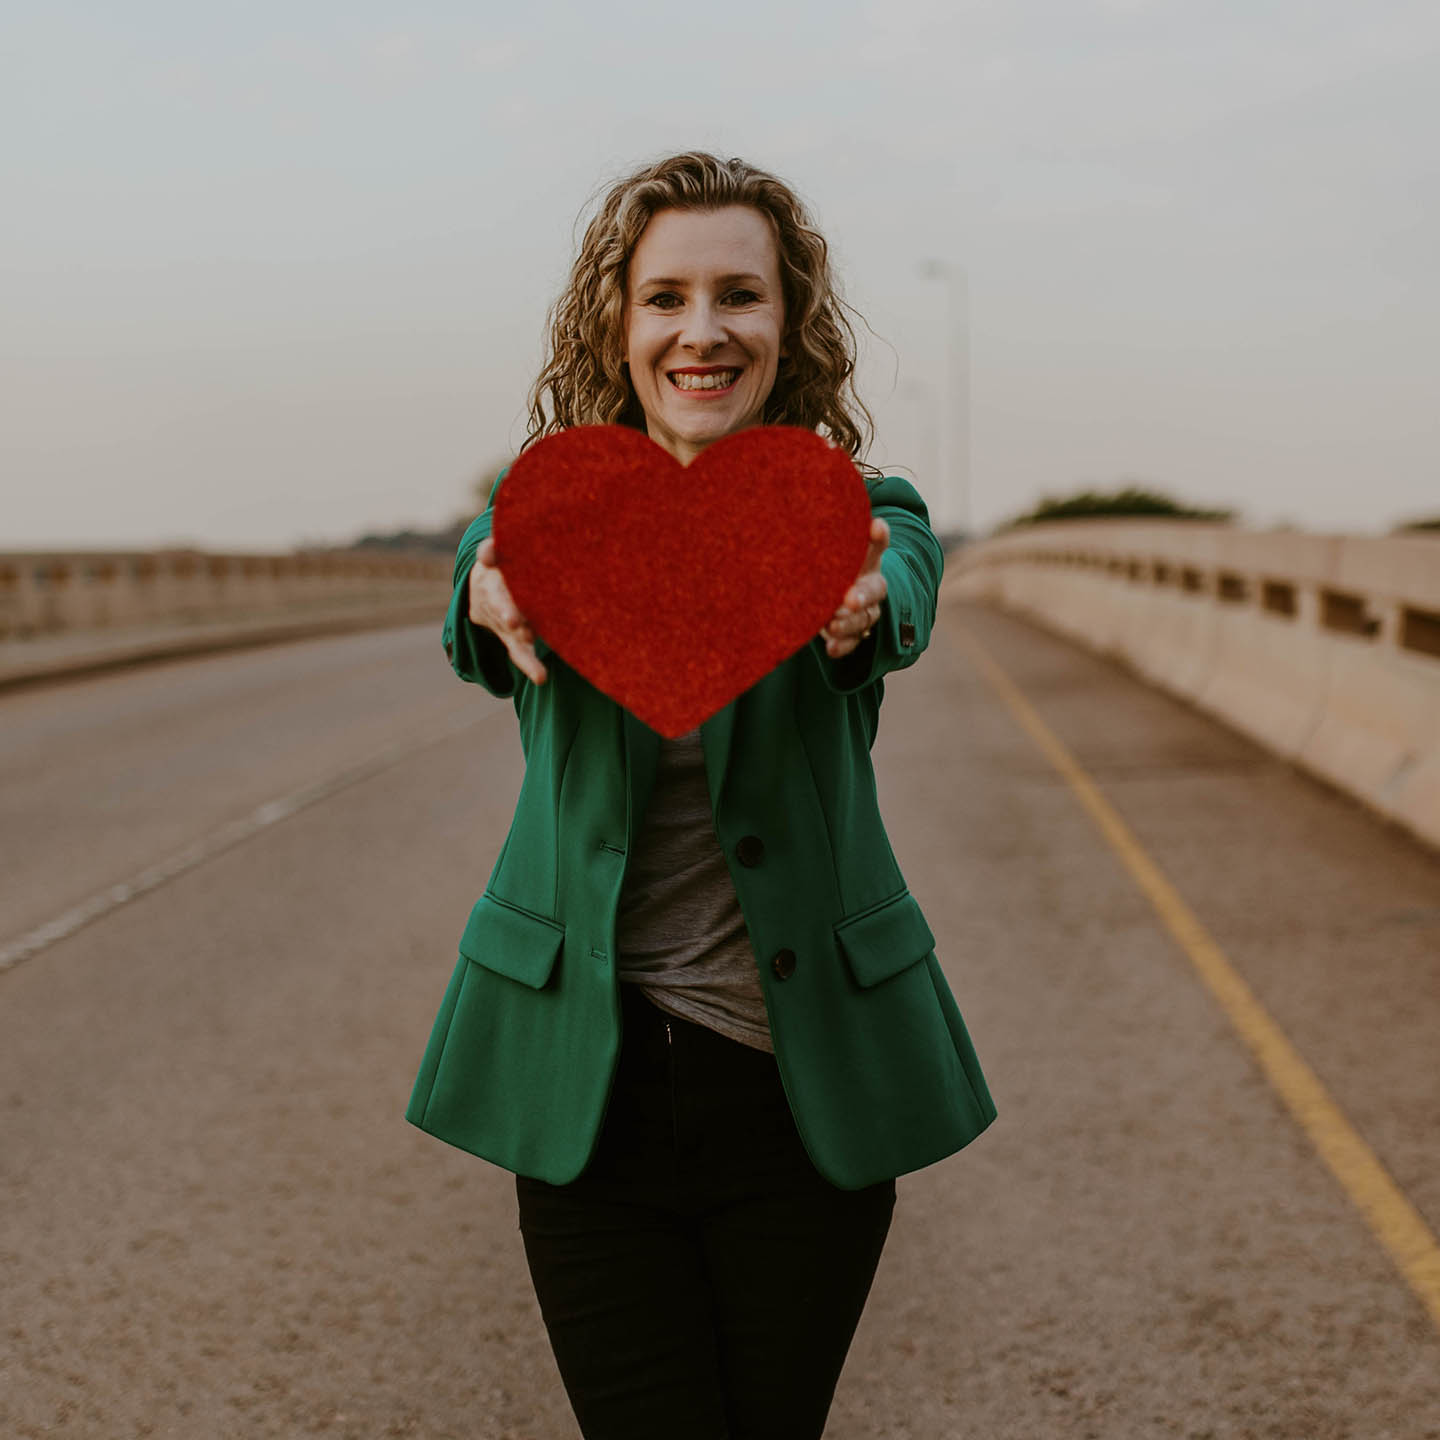 woman wearing a green jacket holding up a red heart